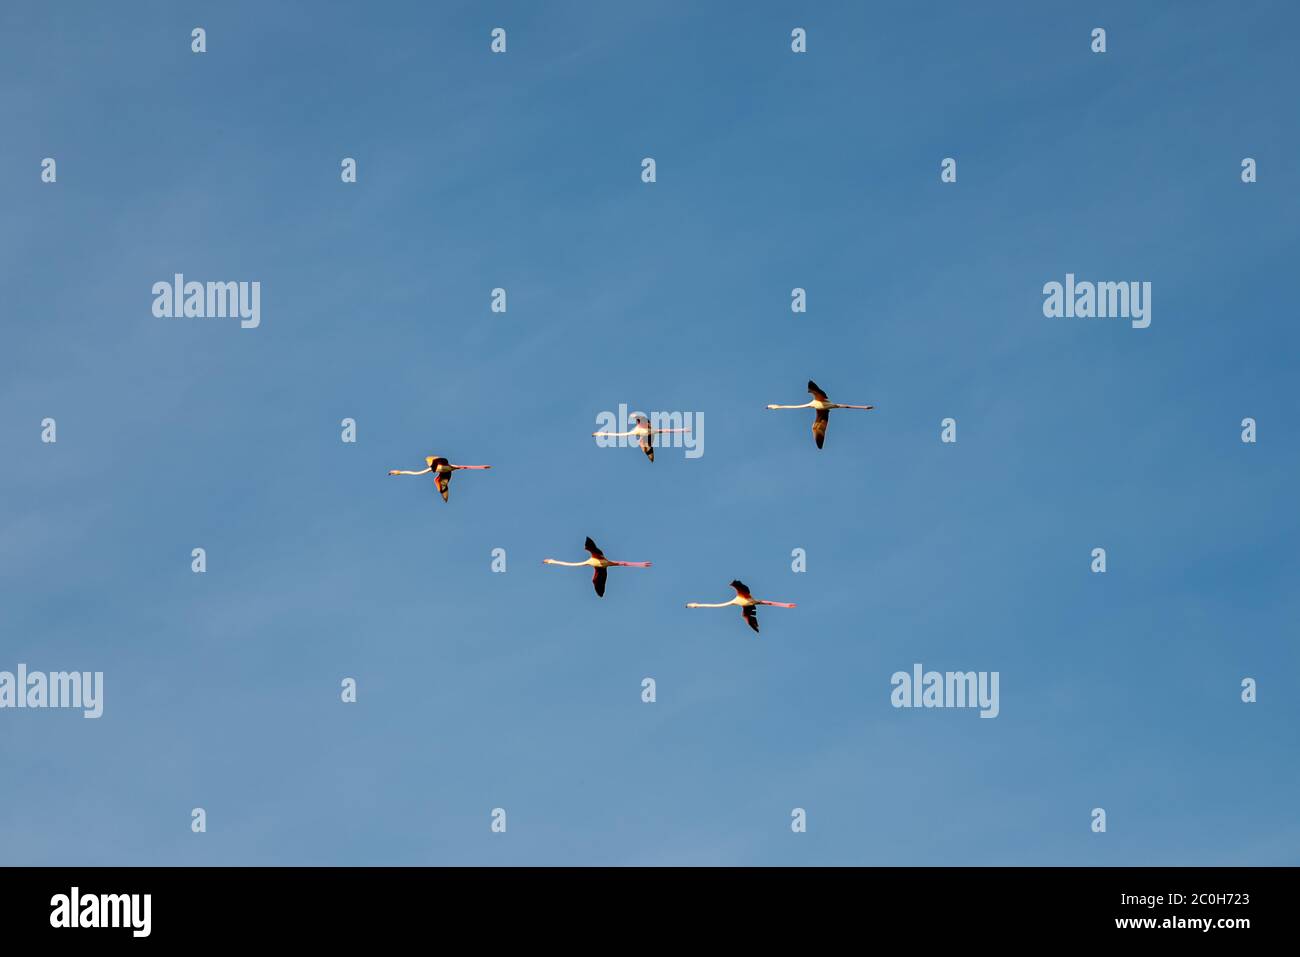 Flamingos flying in the blue sky. Stock Photo